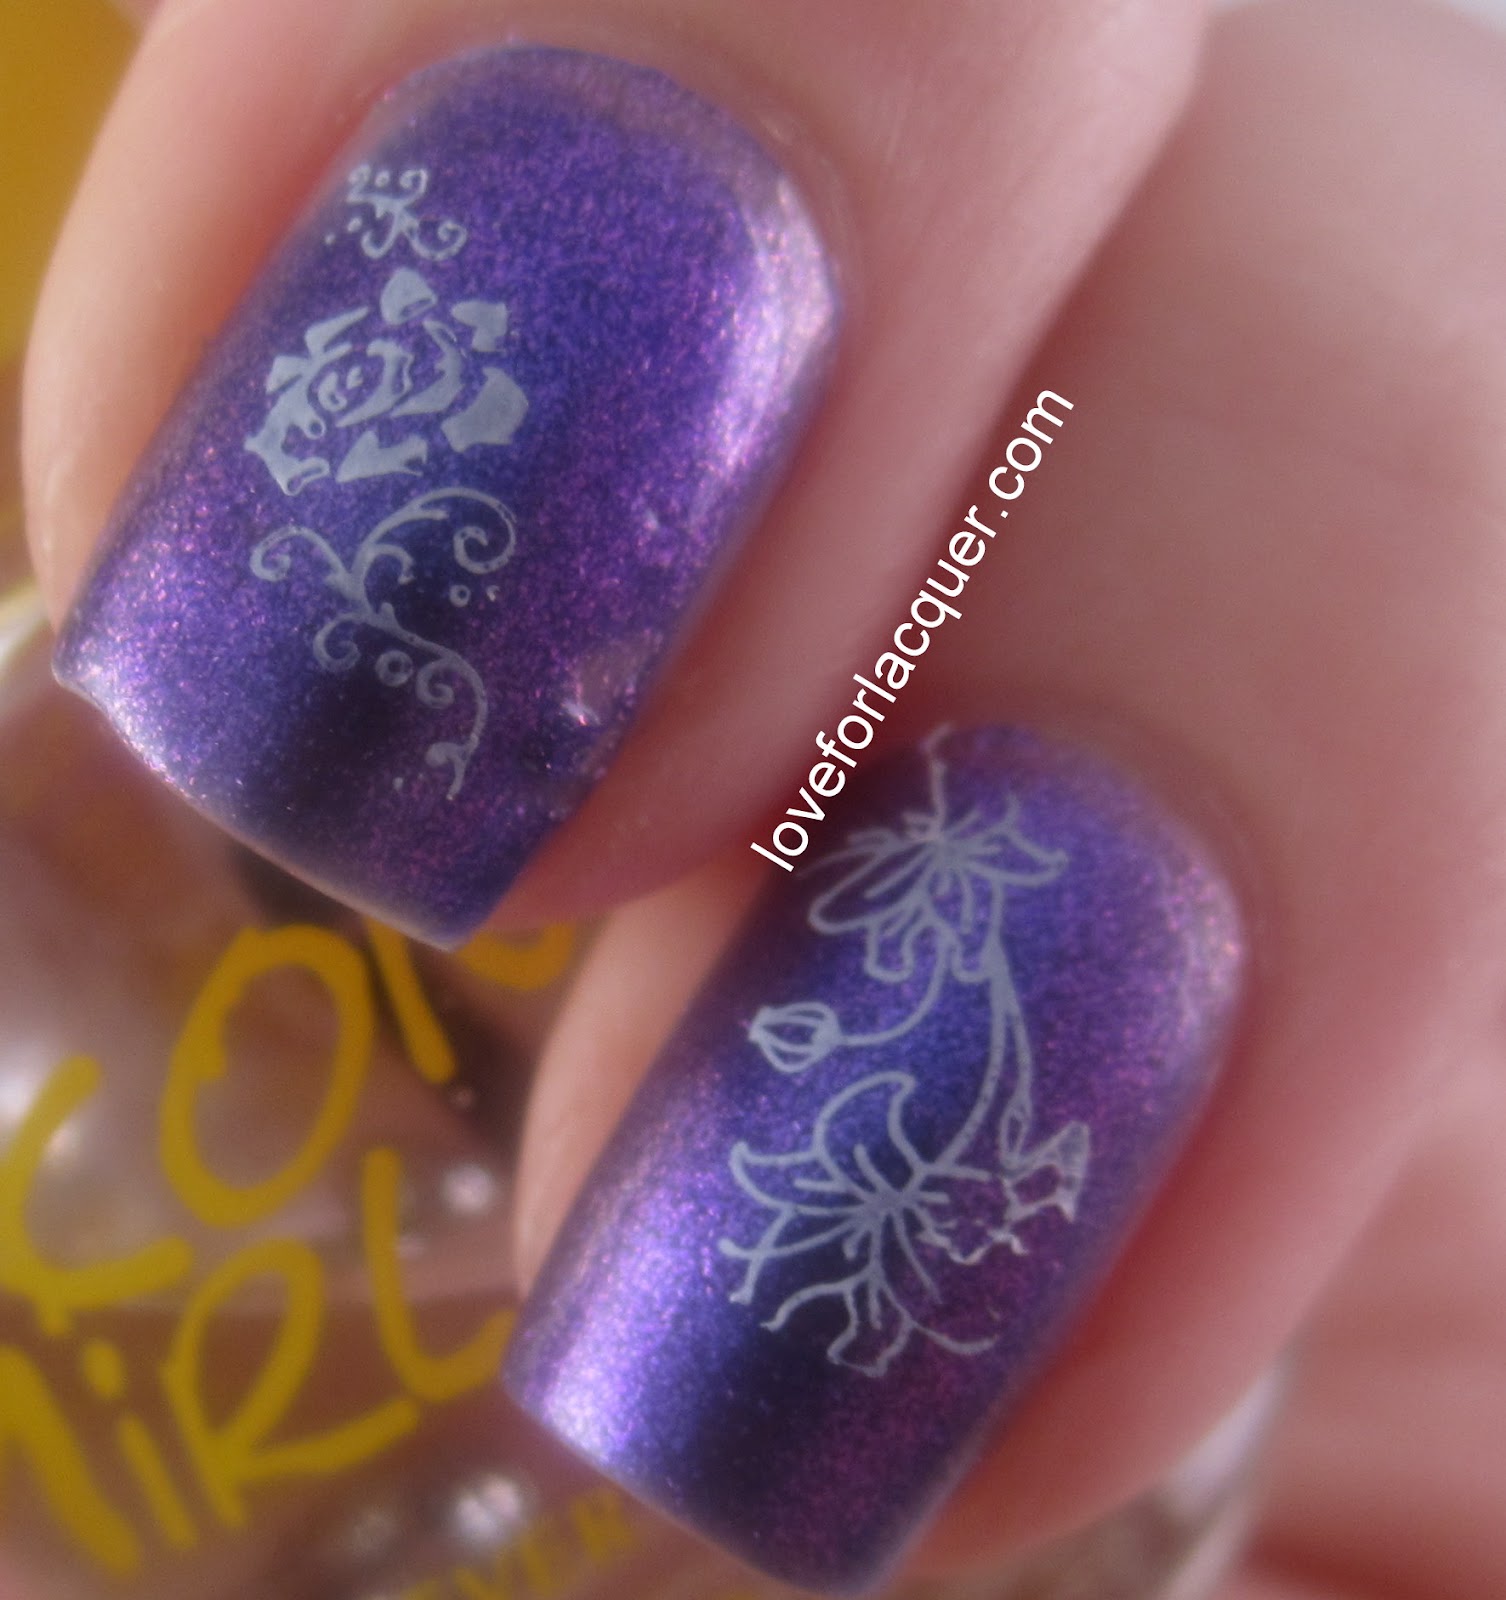 Konad Basic Nail Art Stamping Kit Review - Love for Lacquer